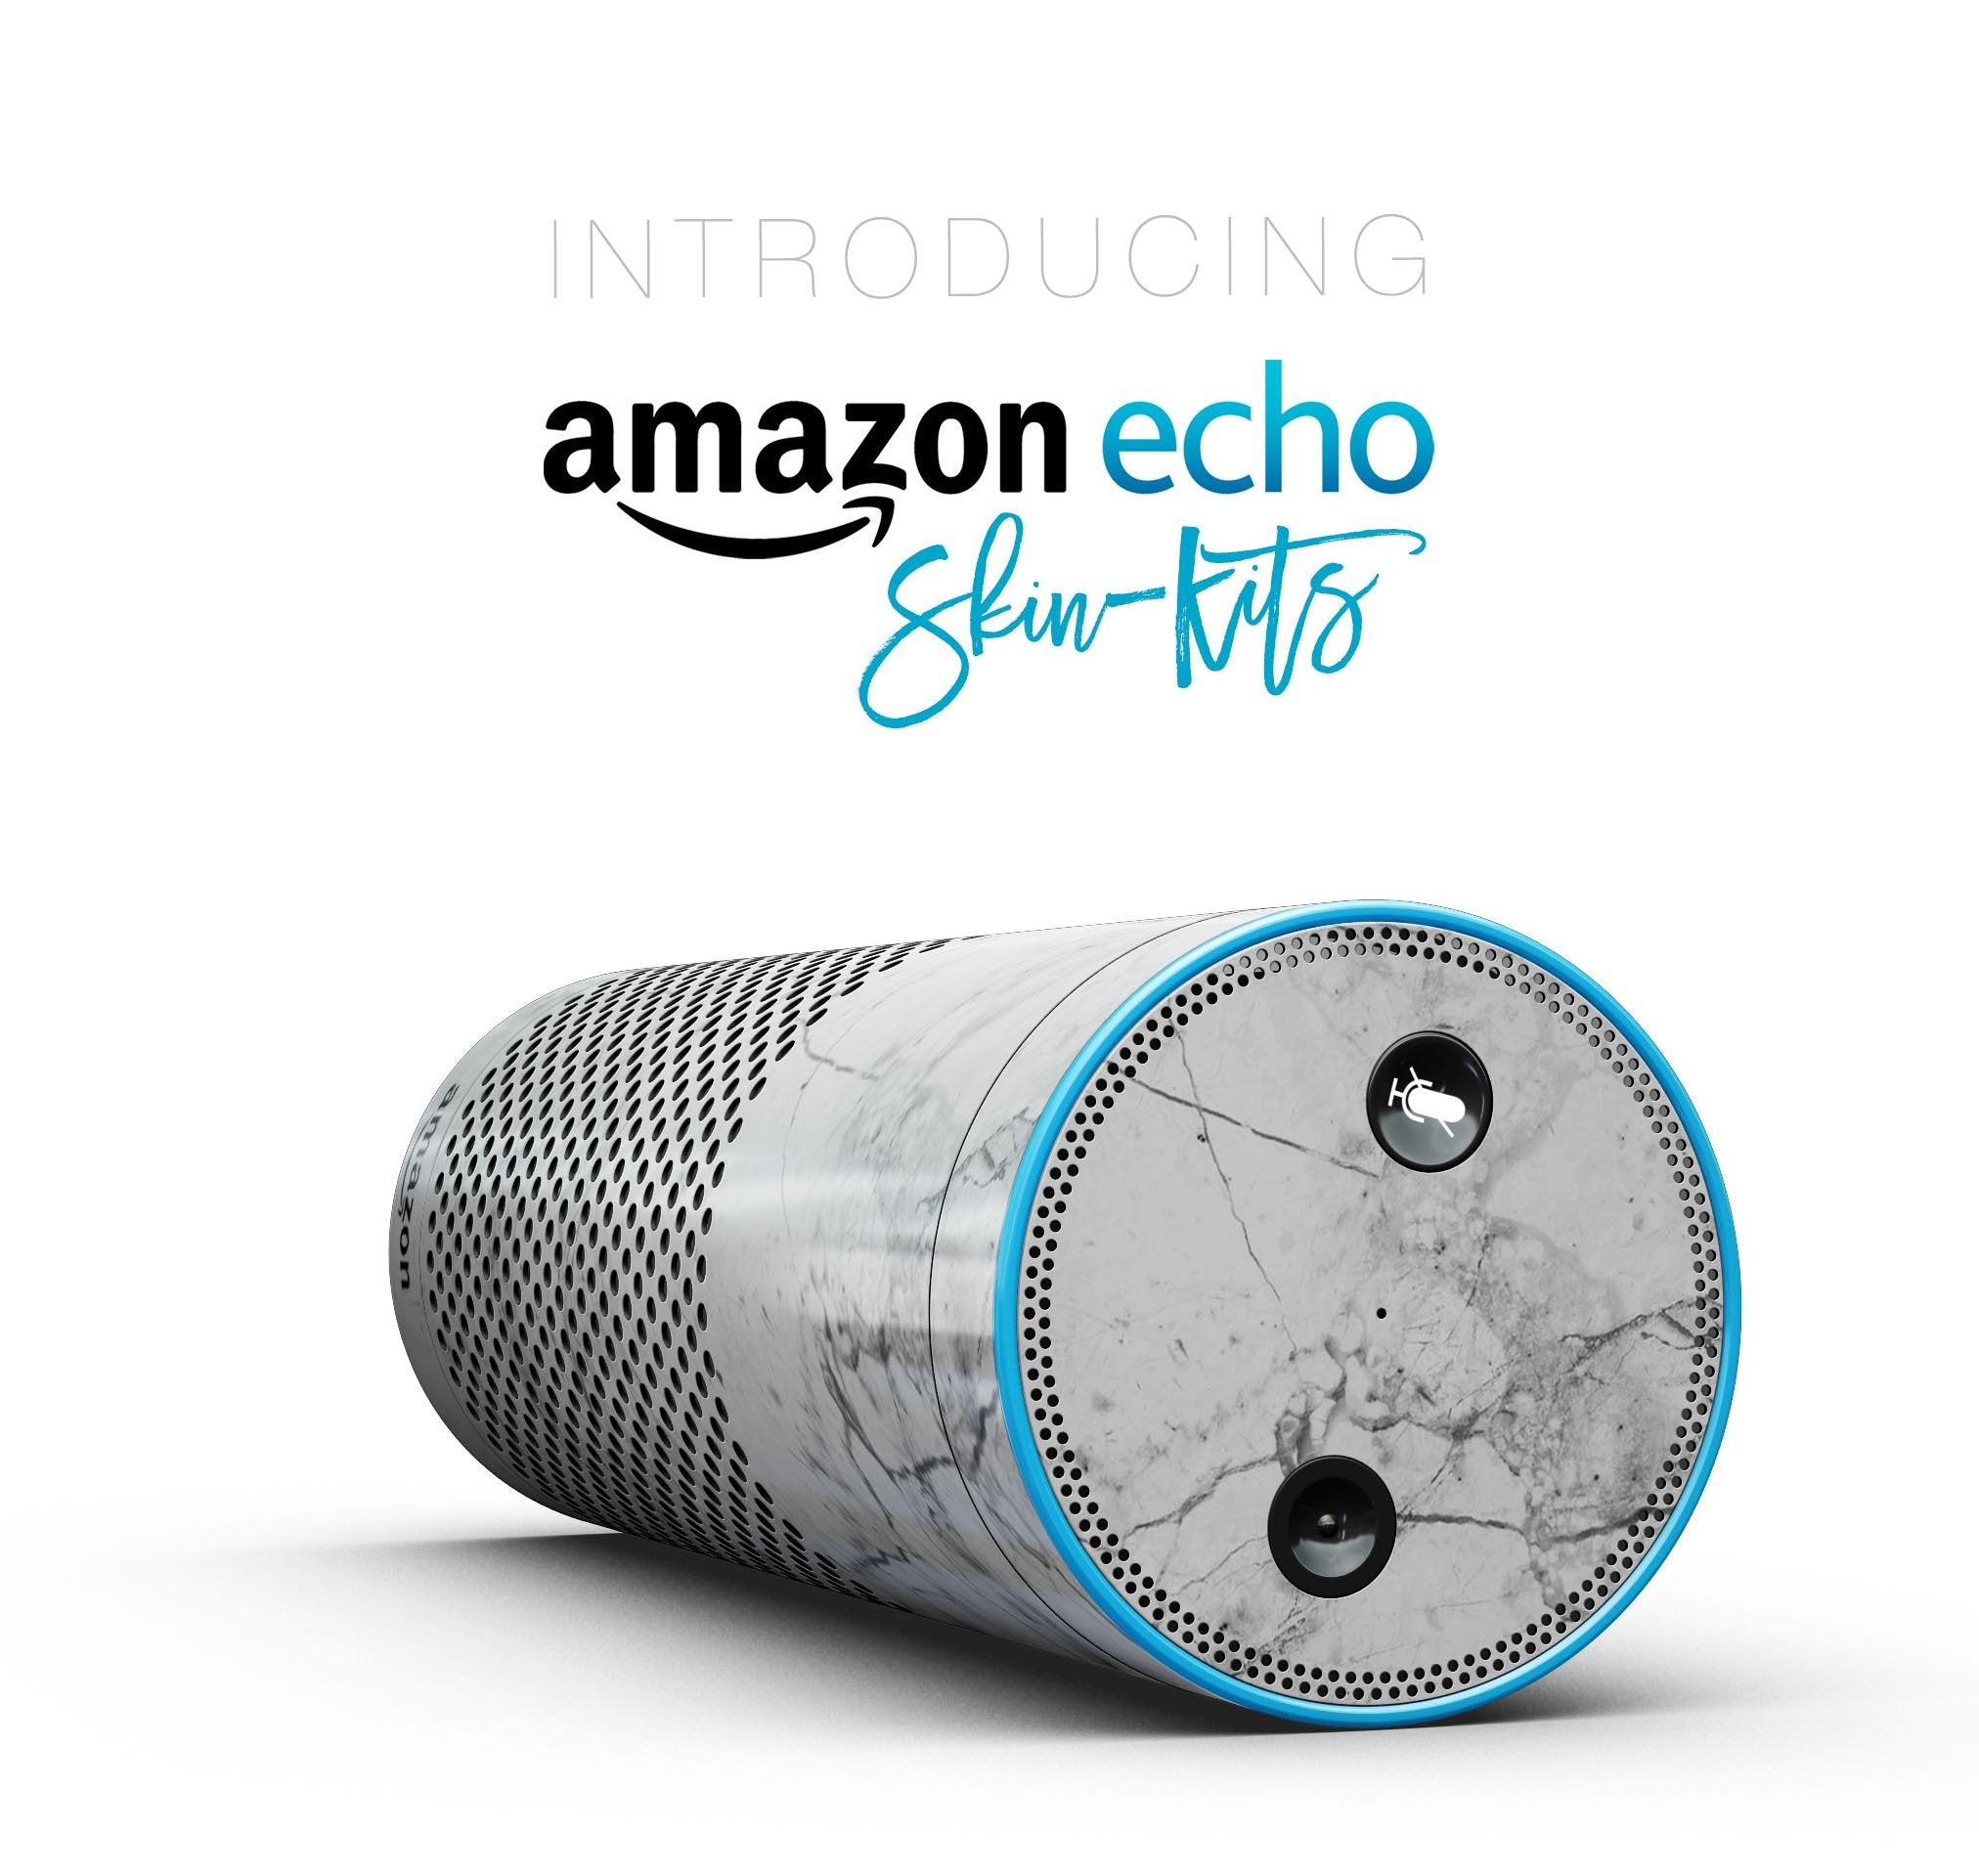 Cracked Marble Surface - Full-Body Skin-Kit for the Amazon Echo